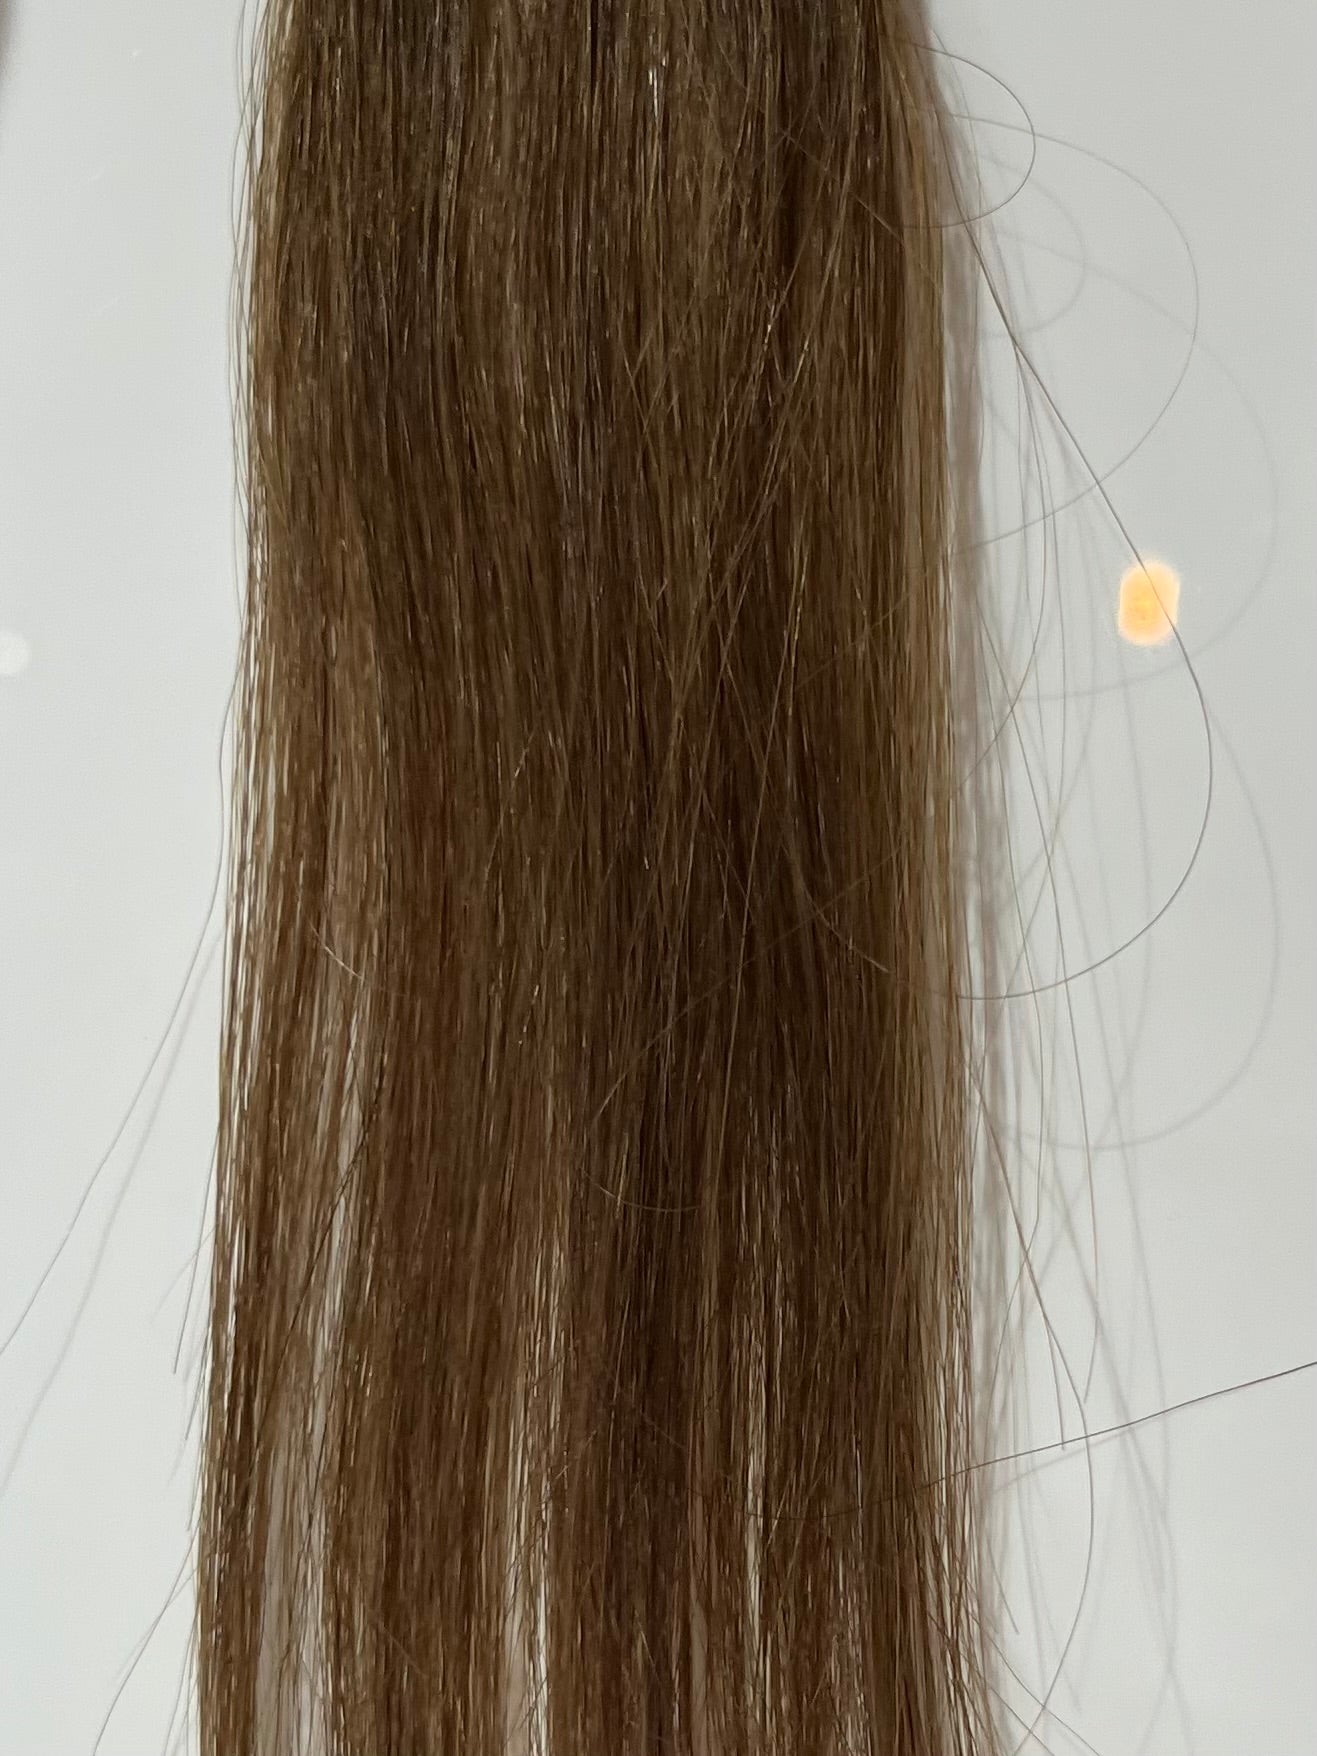 RETAIL HALO EXTENSIONS - NATURAL - CHESTNUT